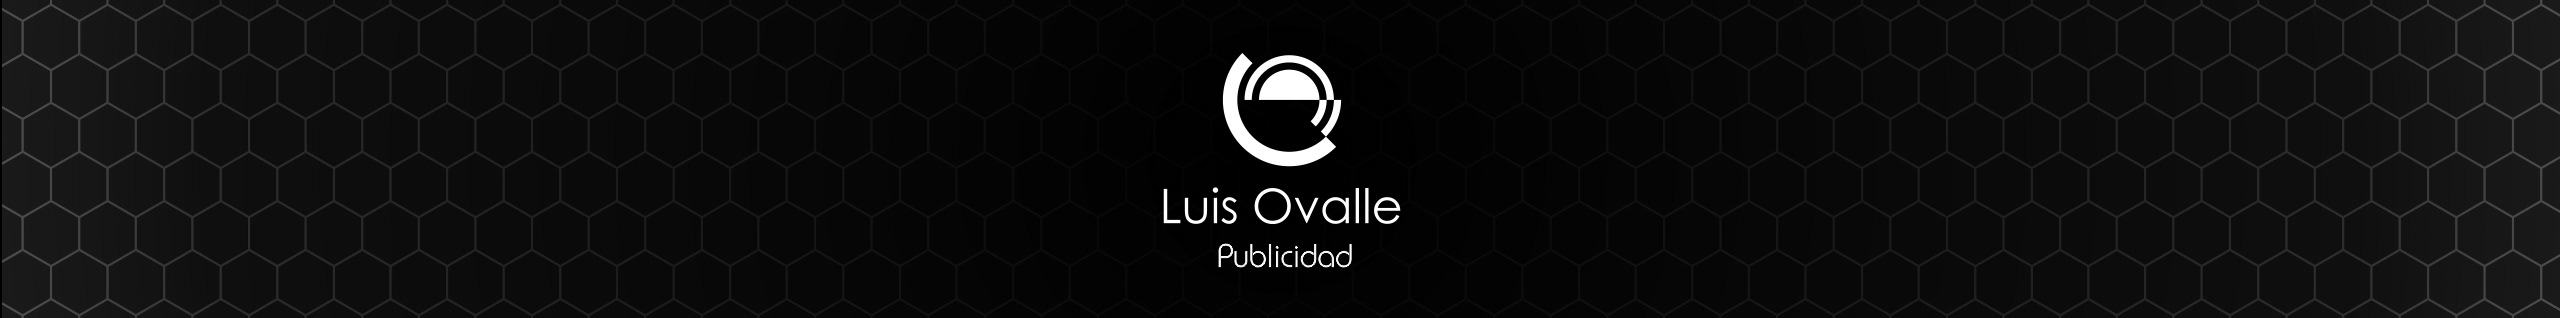 Luis Ovalle's profile banner